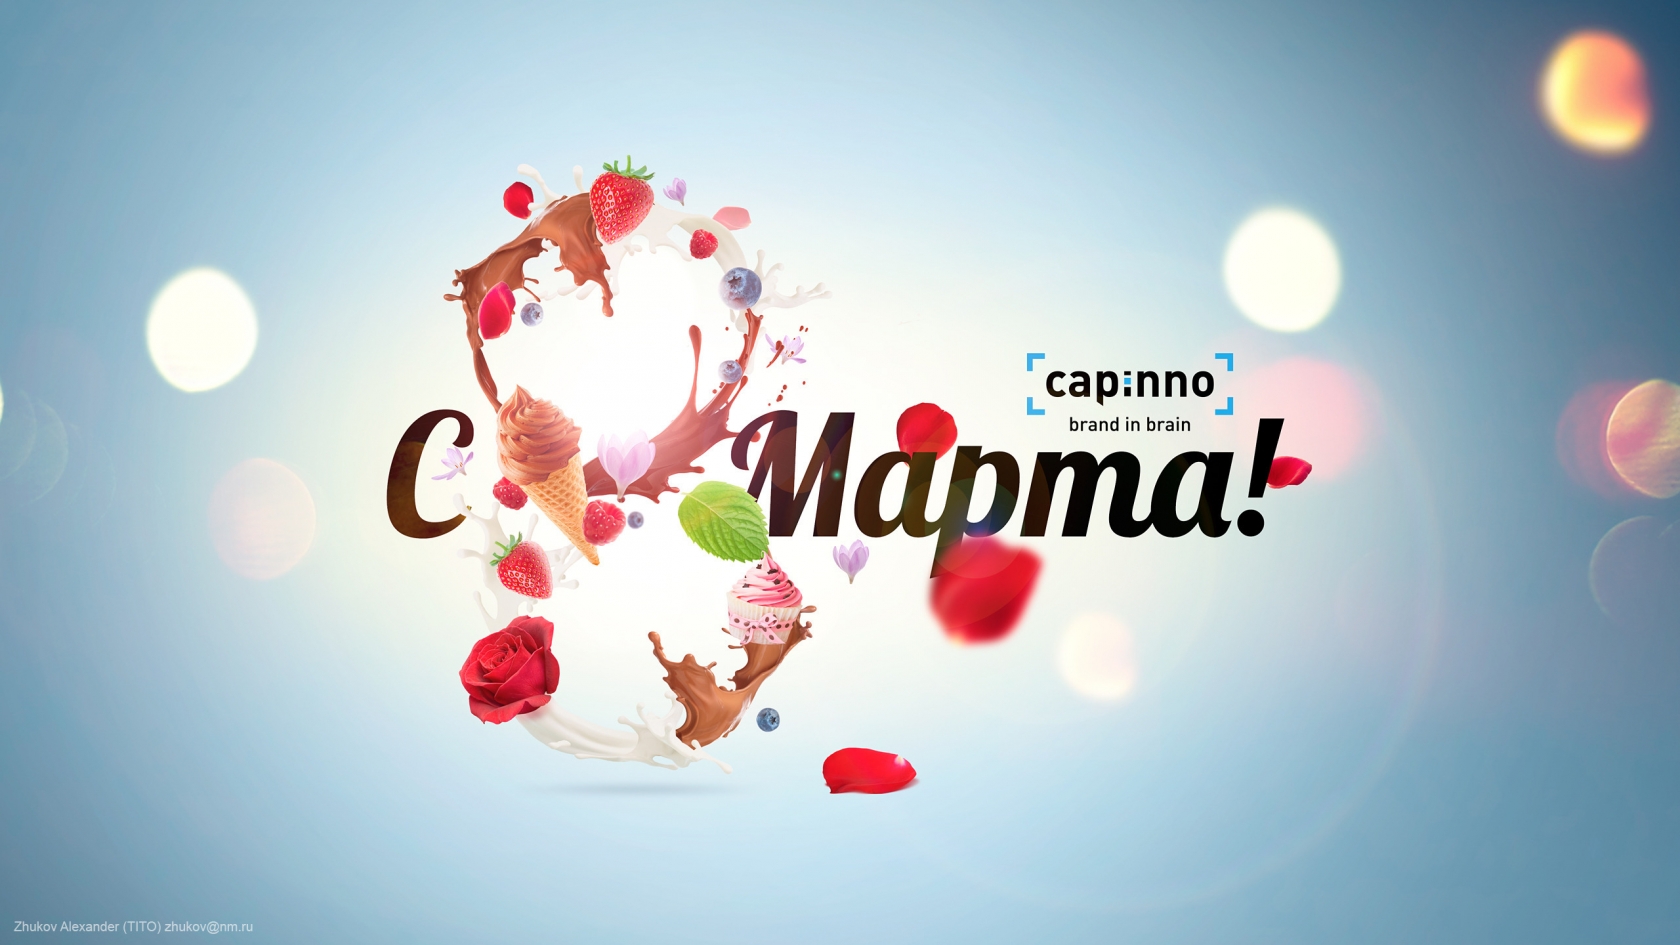 8 March Capinno for 1680 x 945 HDTV resolution